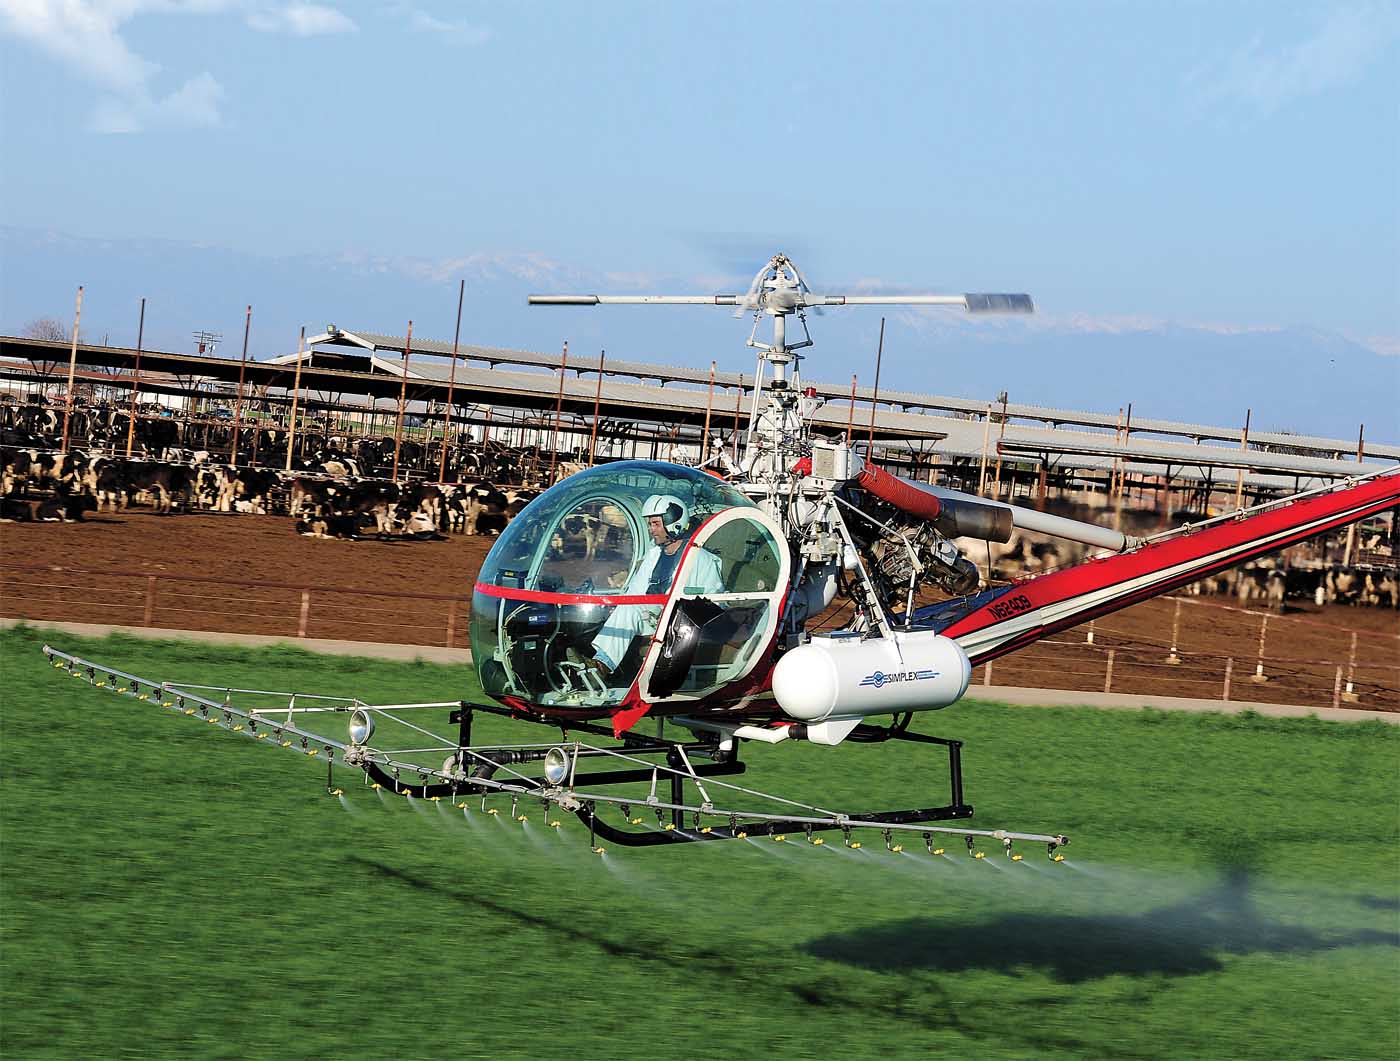 A Hiller OH-23G fitted with a Simplex spraying system. Conditions need to be just right for the spray to have the right effect. Skip Robinson Photo